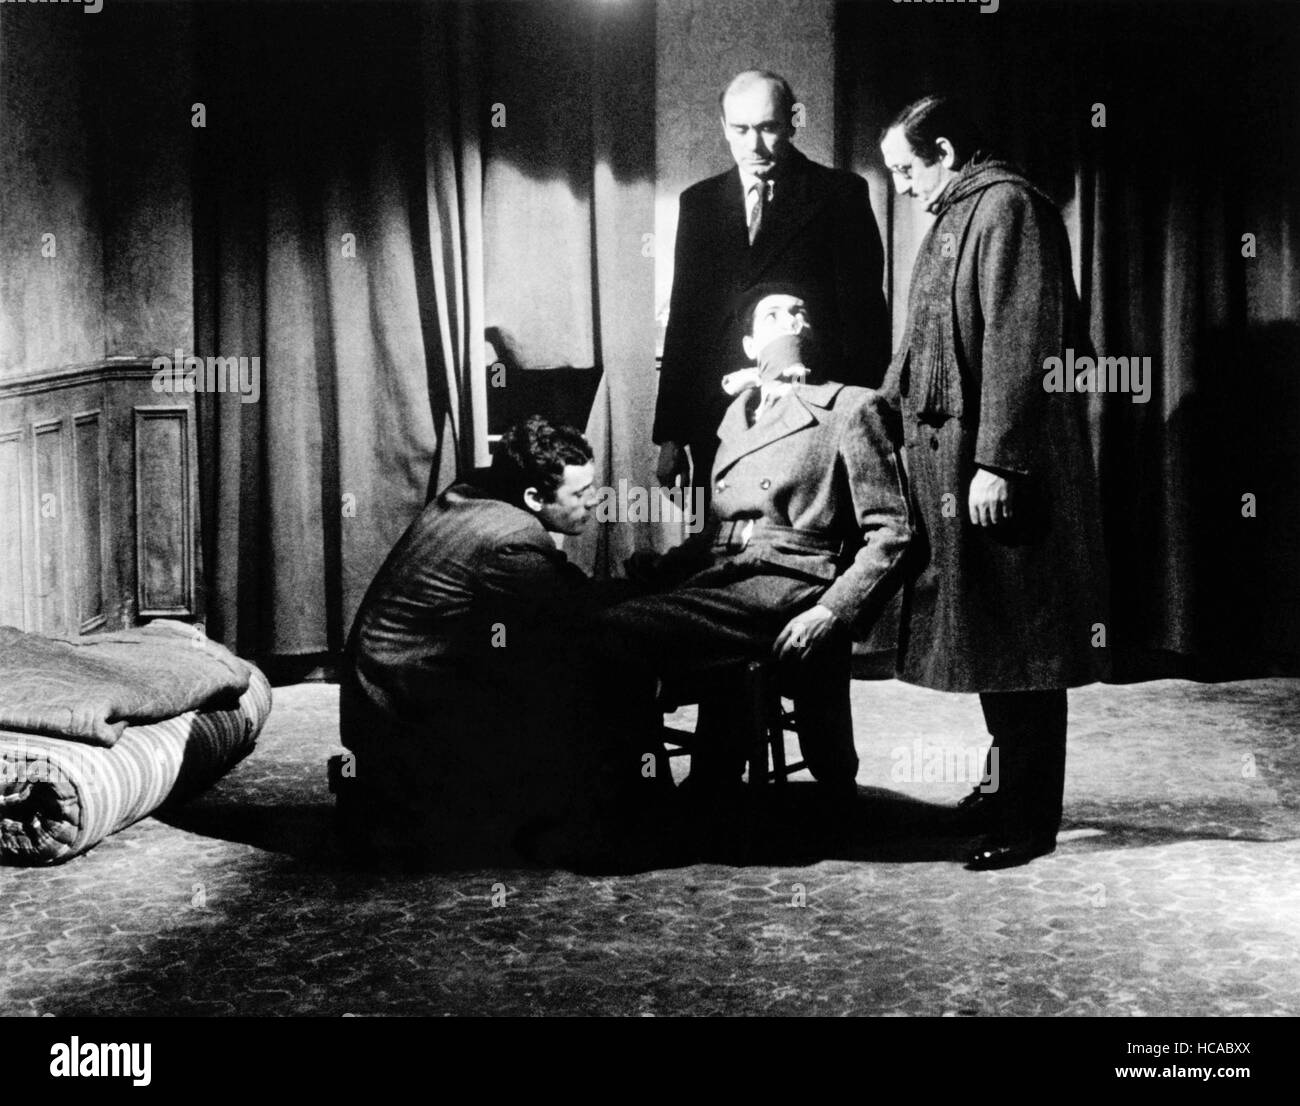 ARMY OF SHADOWS, (aka L'ARMEE DES OMBRES, aka ARMY IN THE SHADOWS, aka THE  SHADOW ARMY), Claude Mann, Alain Libolt (seated Stock Photo - Alamy